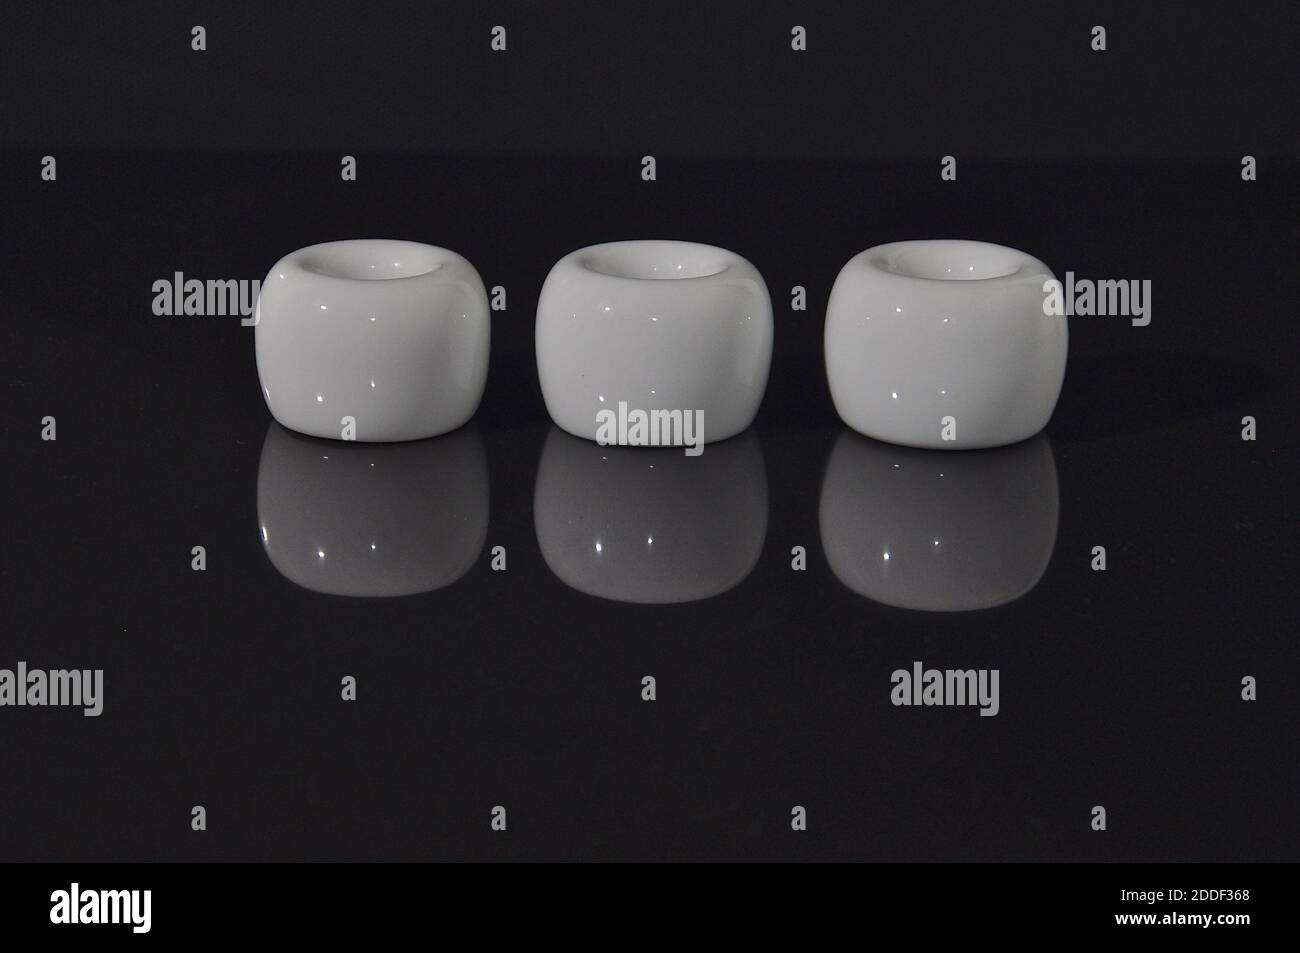 A row of white ceramic cylinders on a shiny black reflective surface, showing an inverted mirror image. Stock Photo